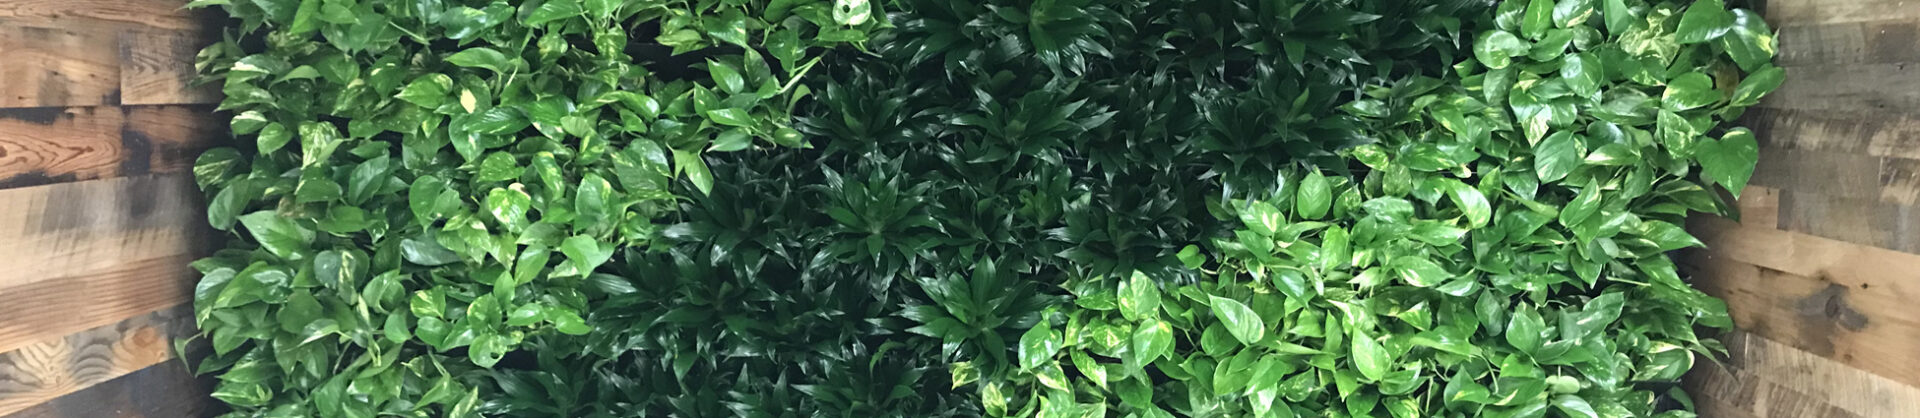 Indoor Wall Plants at Foliage Décor Services